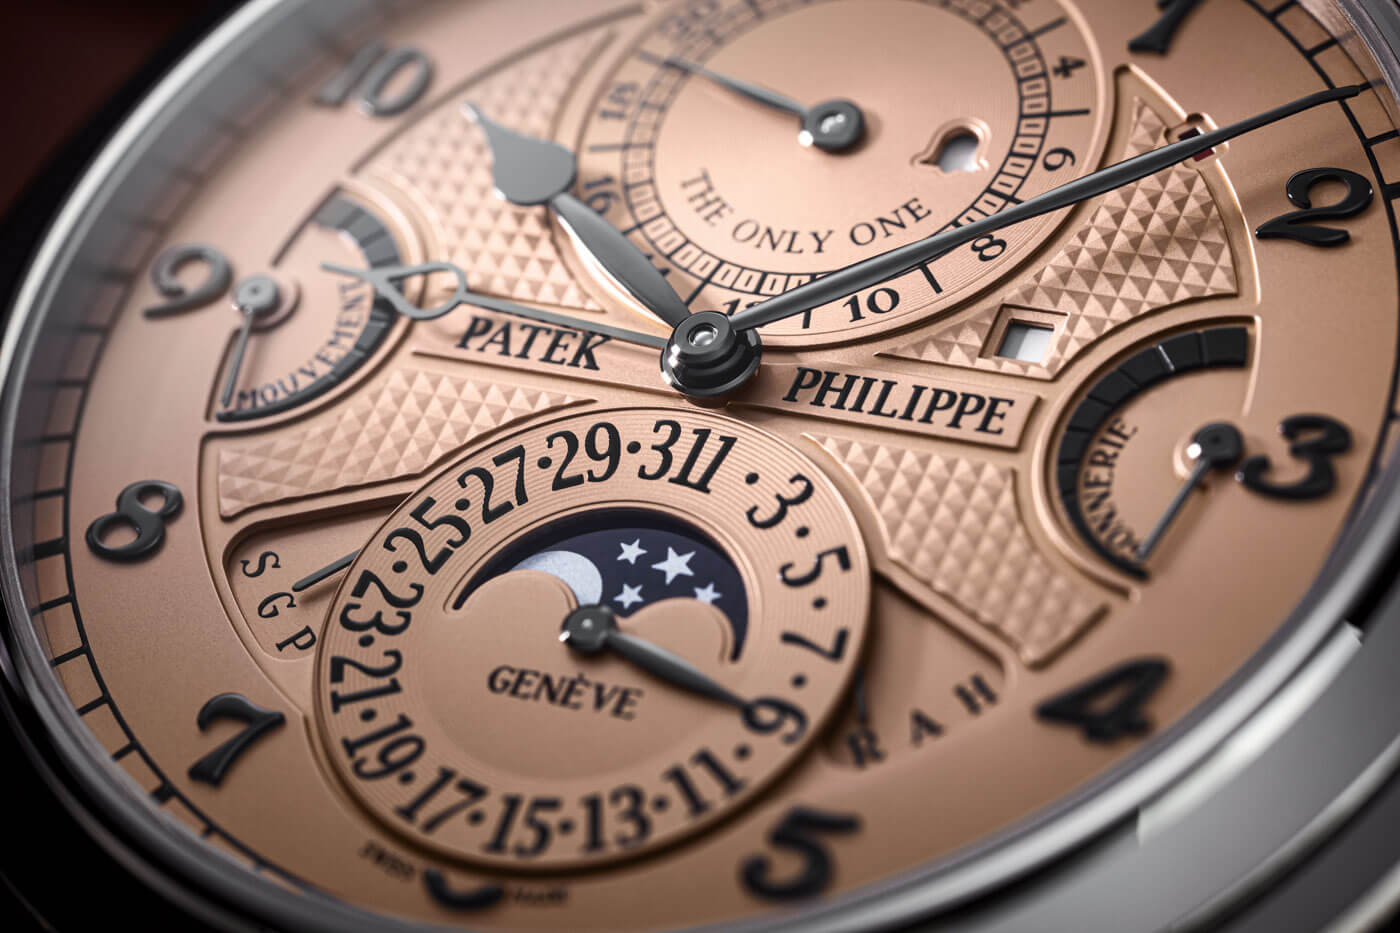 Most Expensive Watch: Patek Philippe 5016